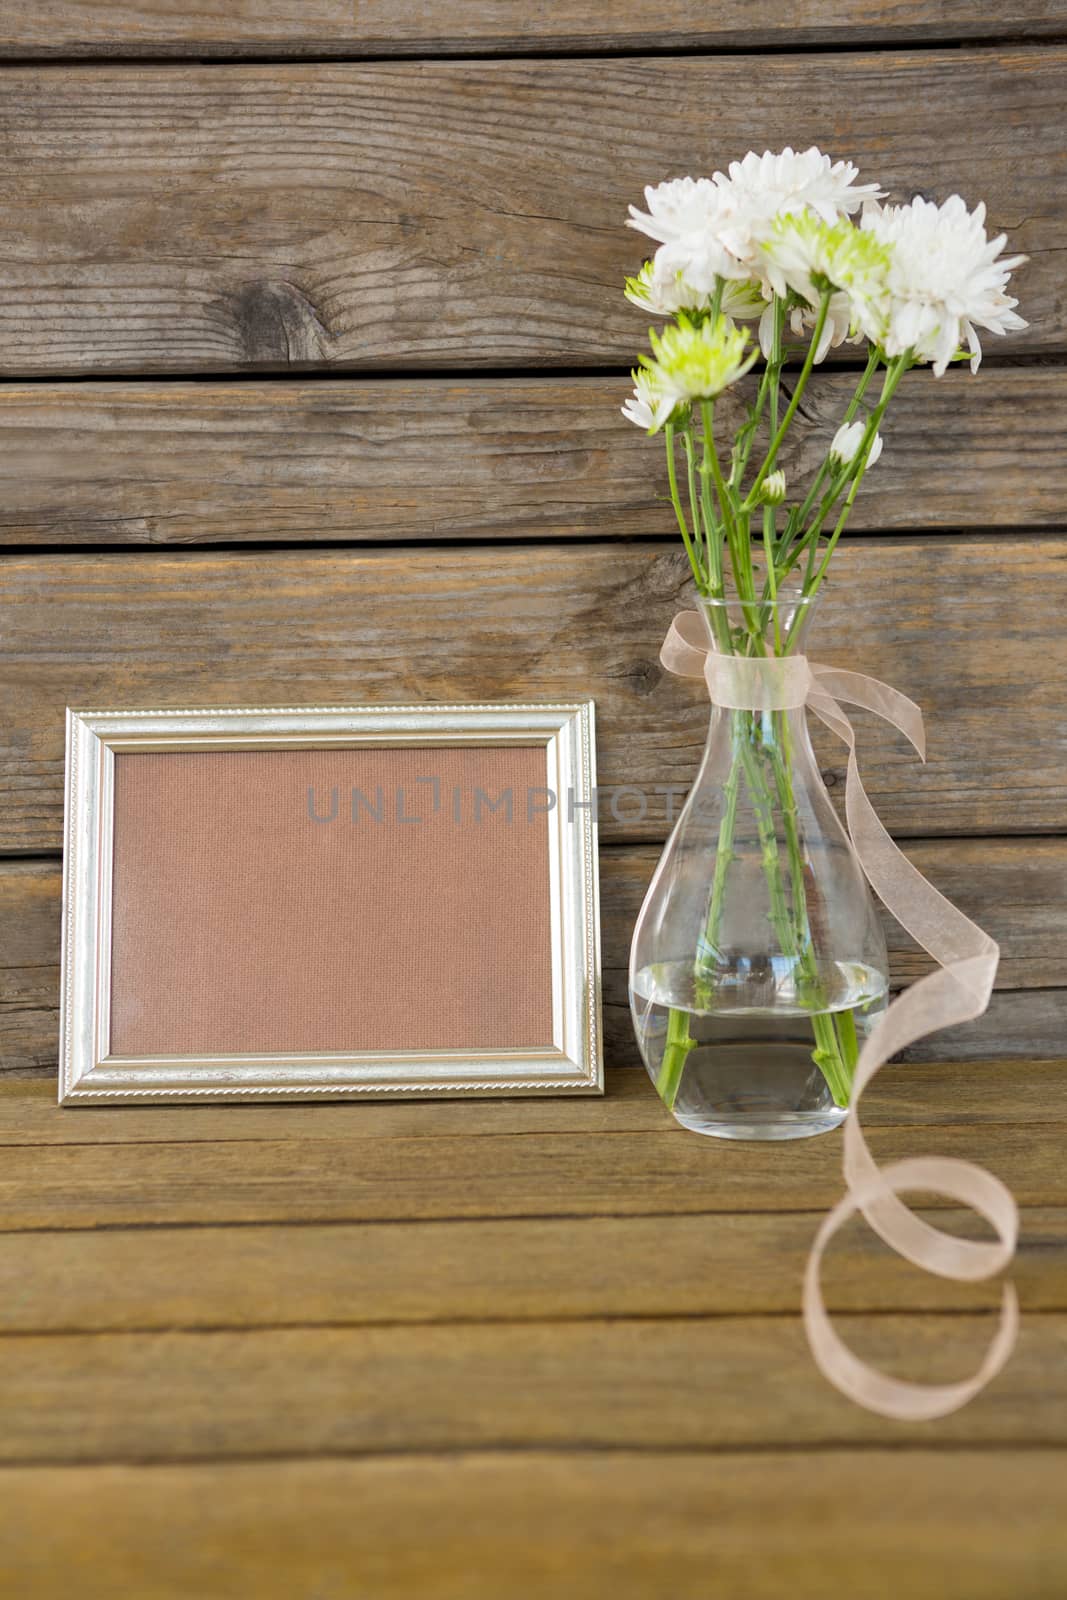 Photo frame and flower vase on wooden surface by Wavebreakmedia